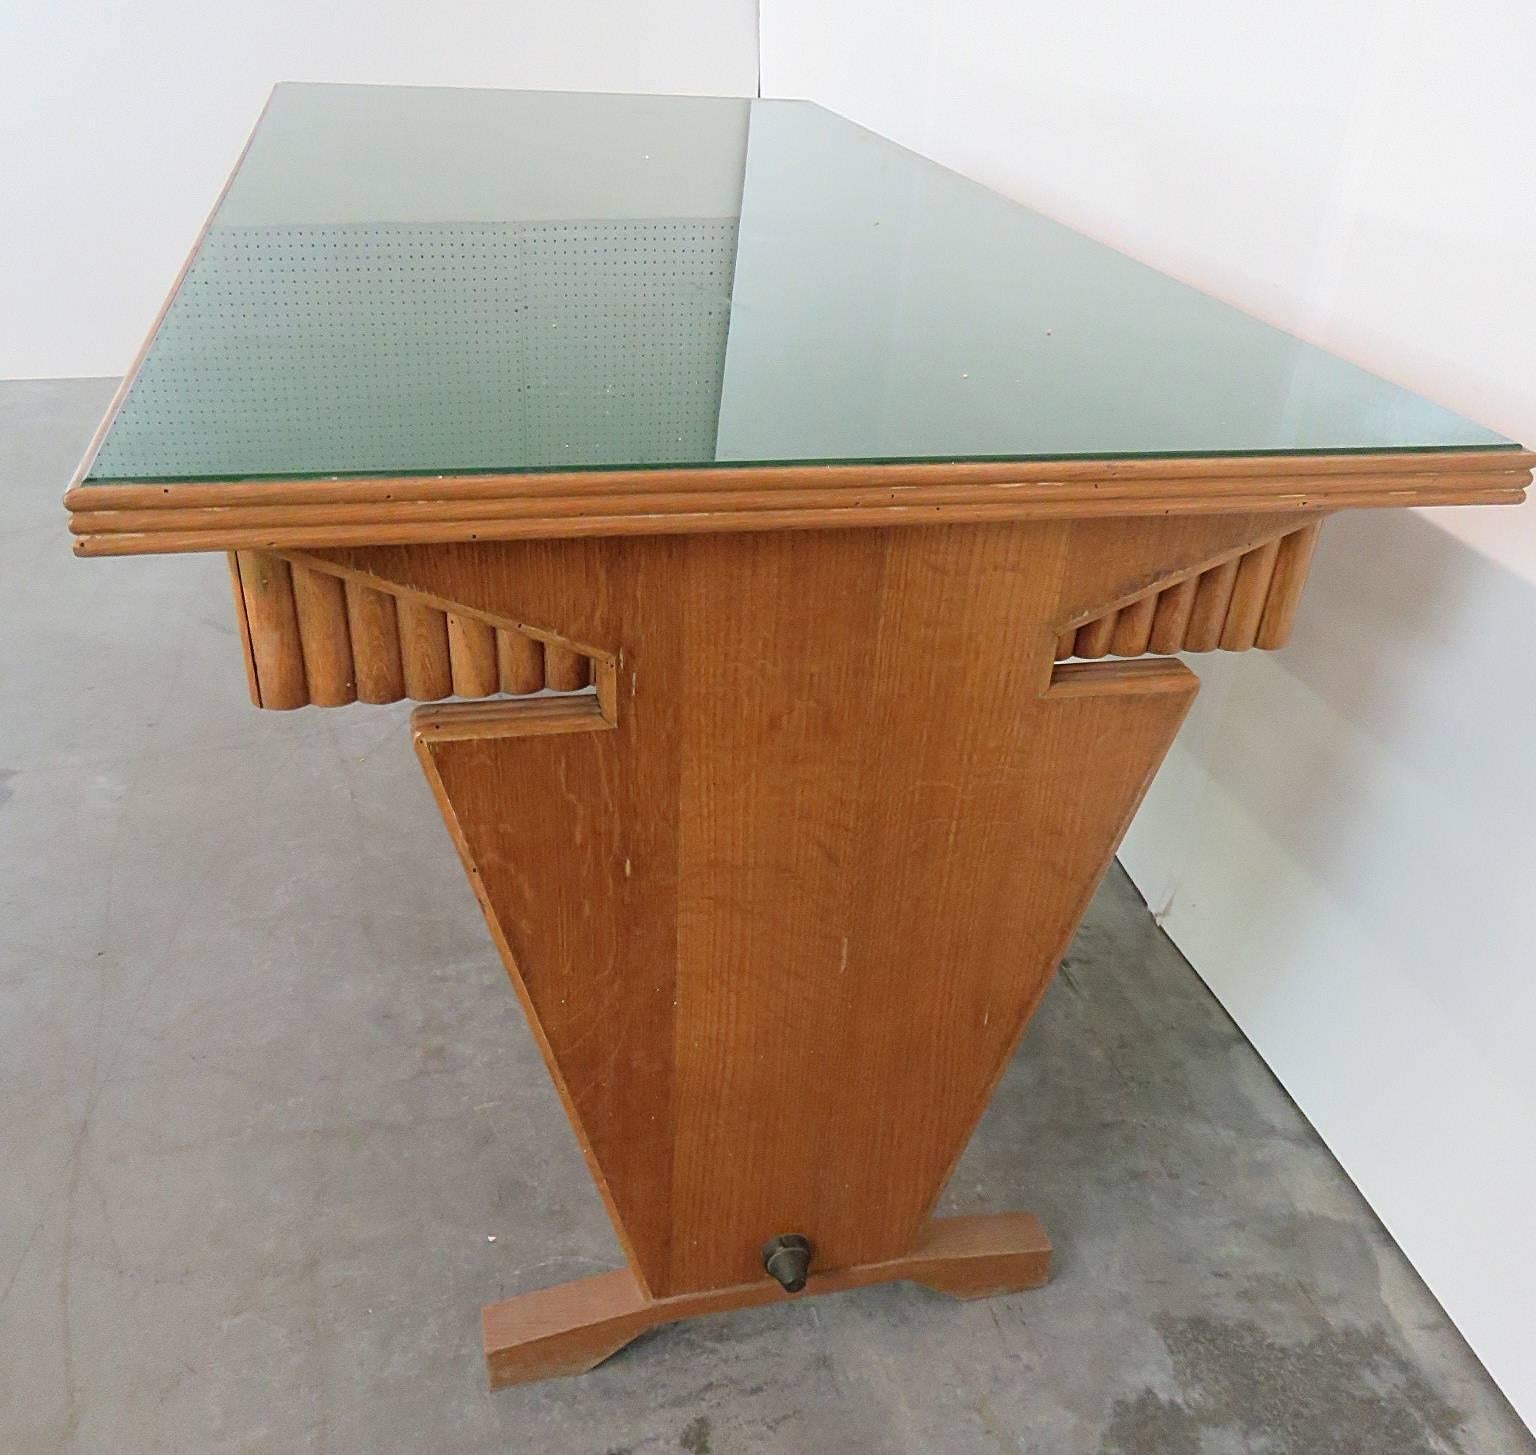 Gio Ponti style desk with three drawers and a glass top.